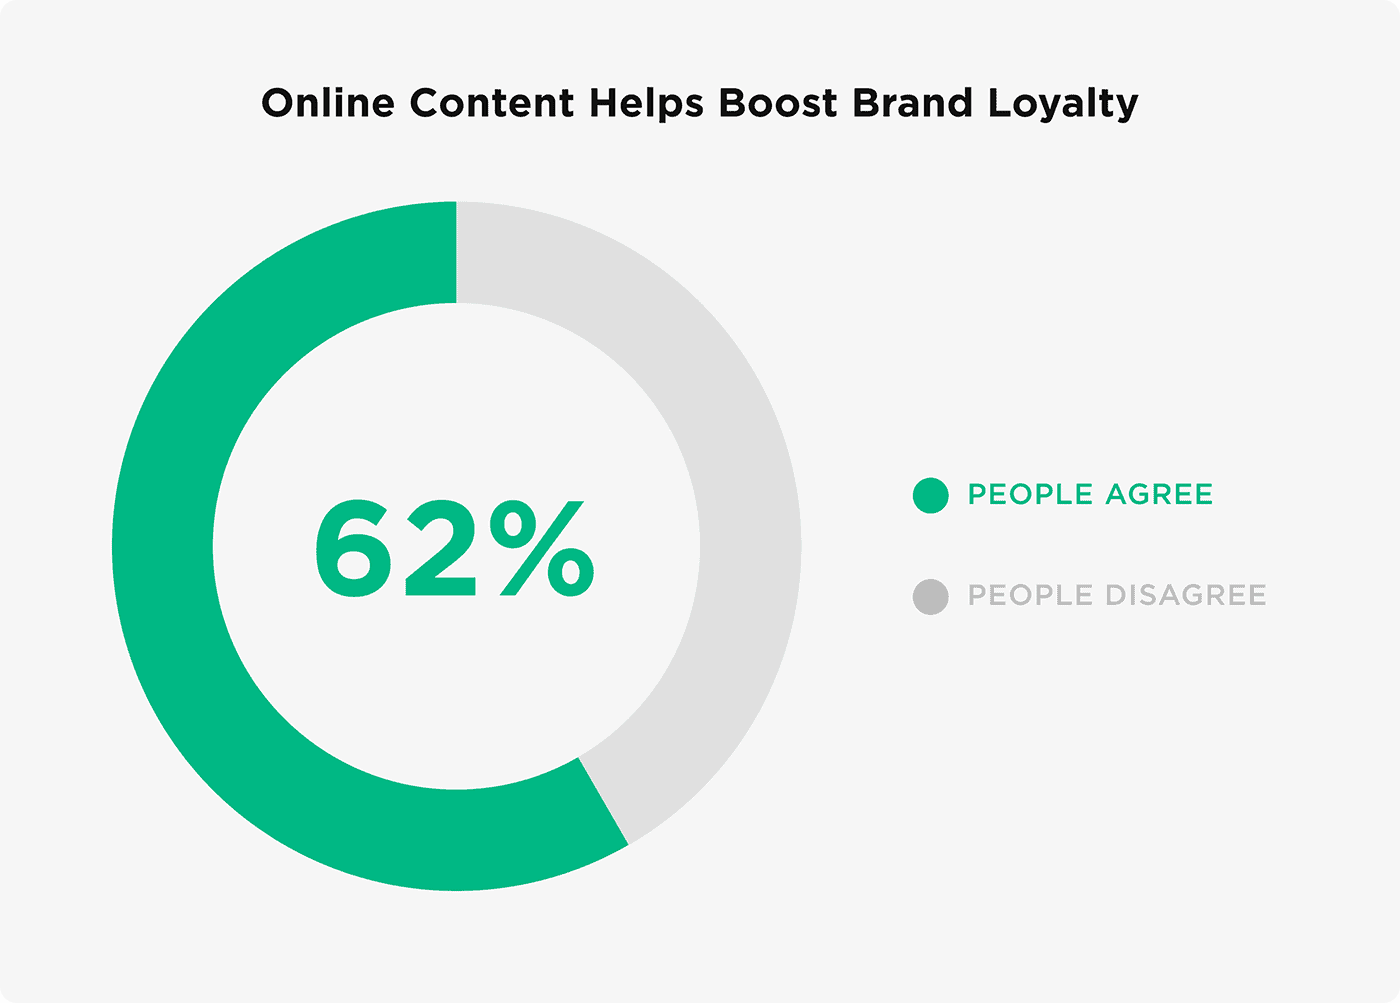 Online content helps boost brand loyalty